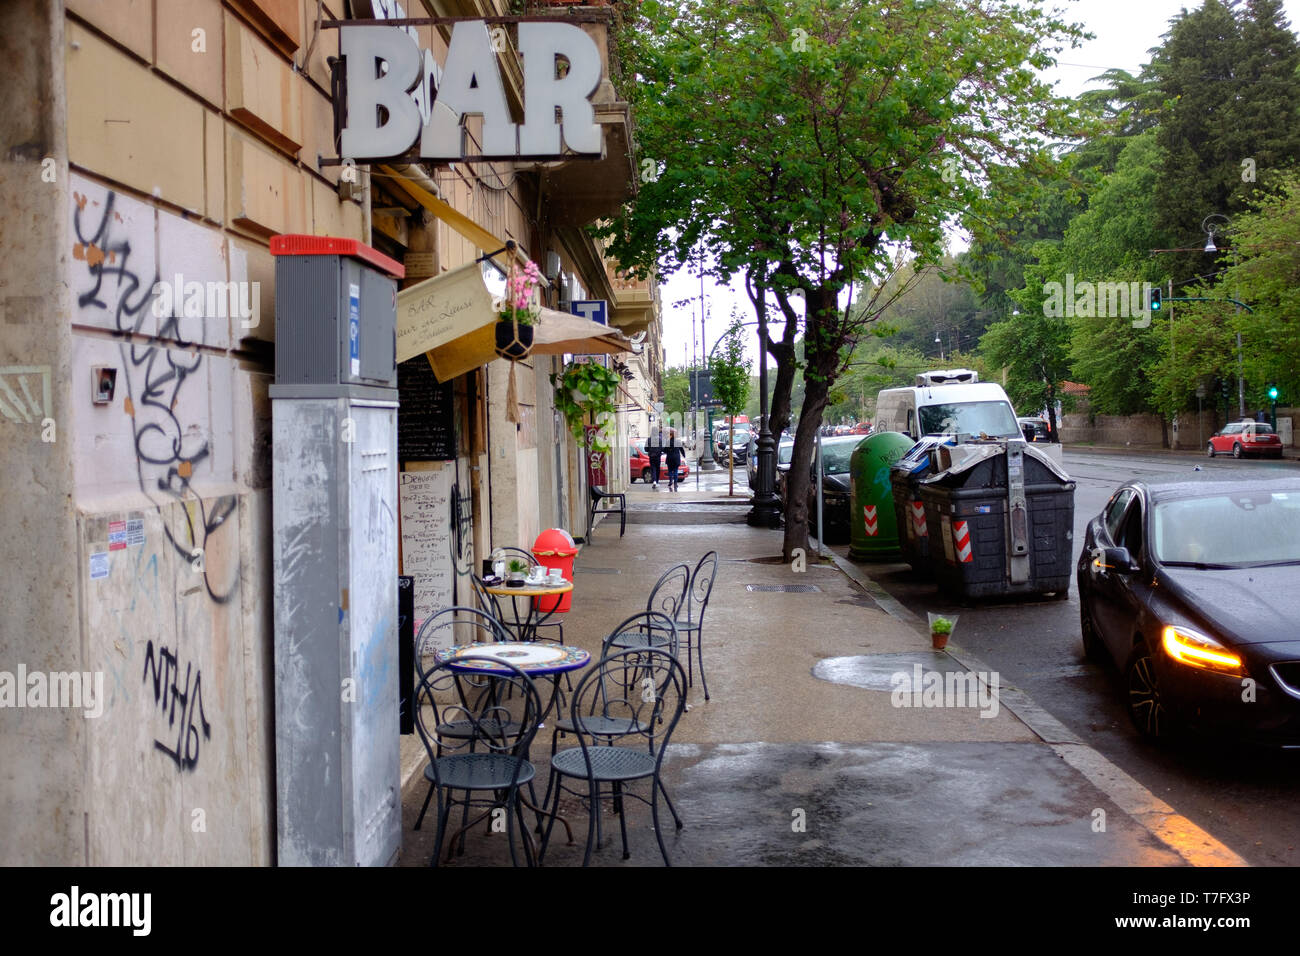 A traditional locals bar on a roadside in Rome, Italy Stock Photo